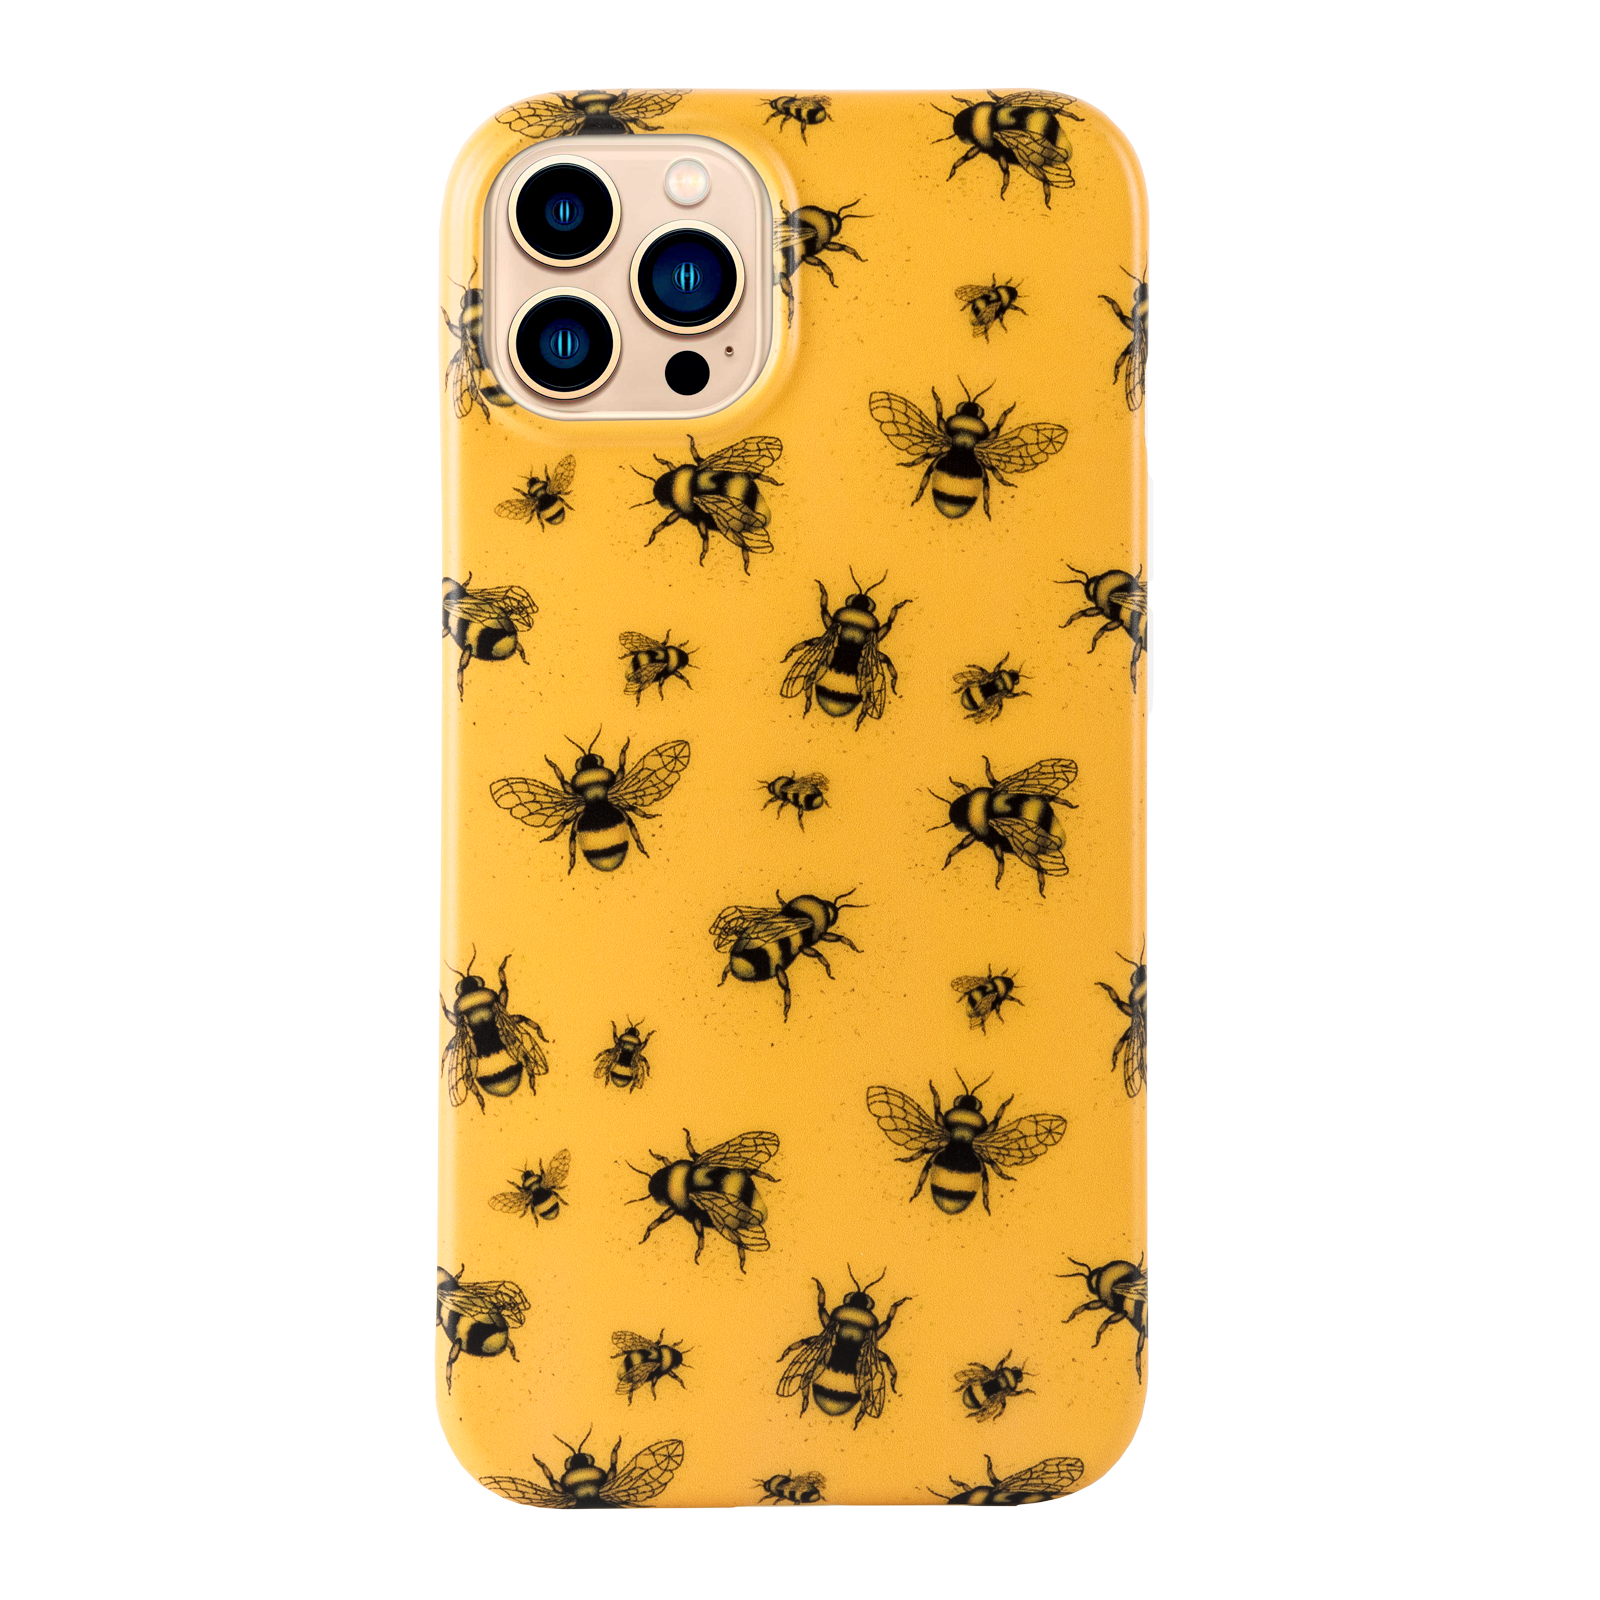 Bees Pattern iPhone Case